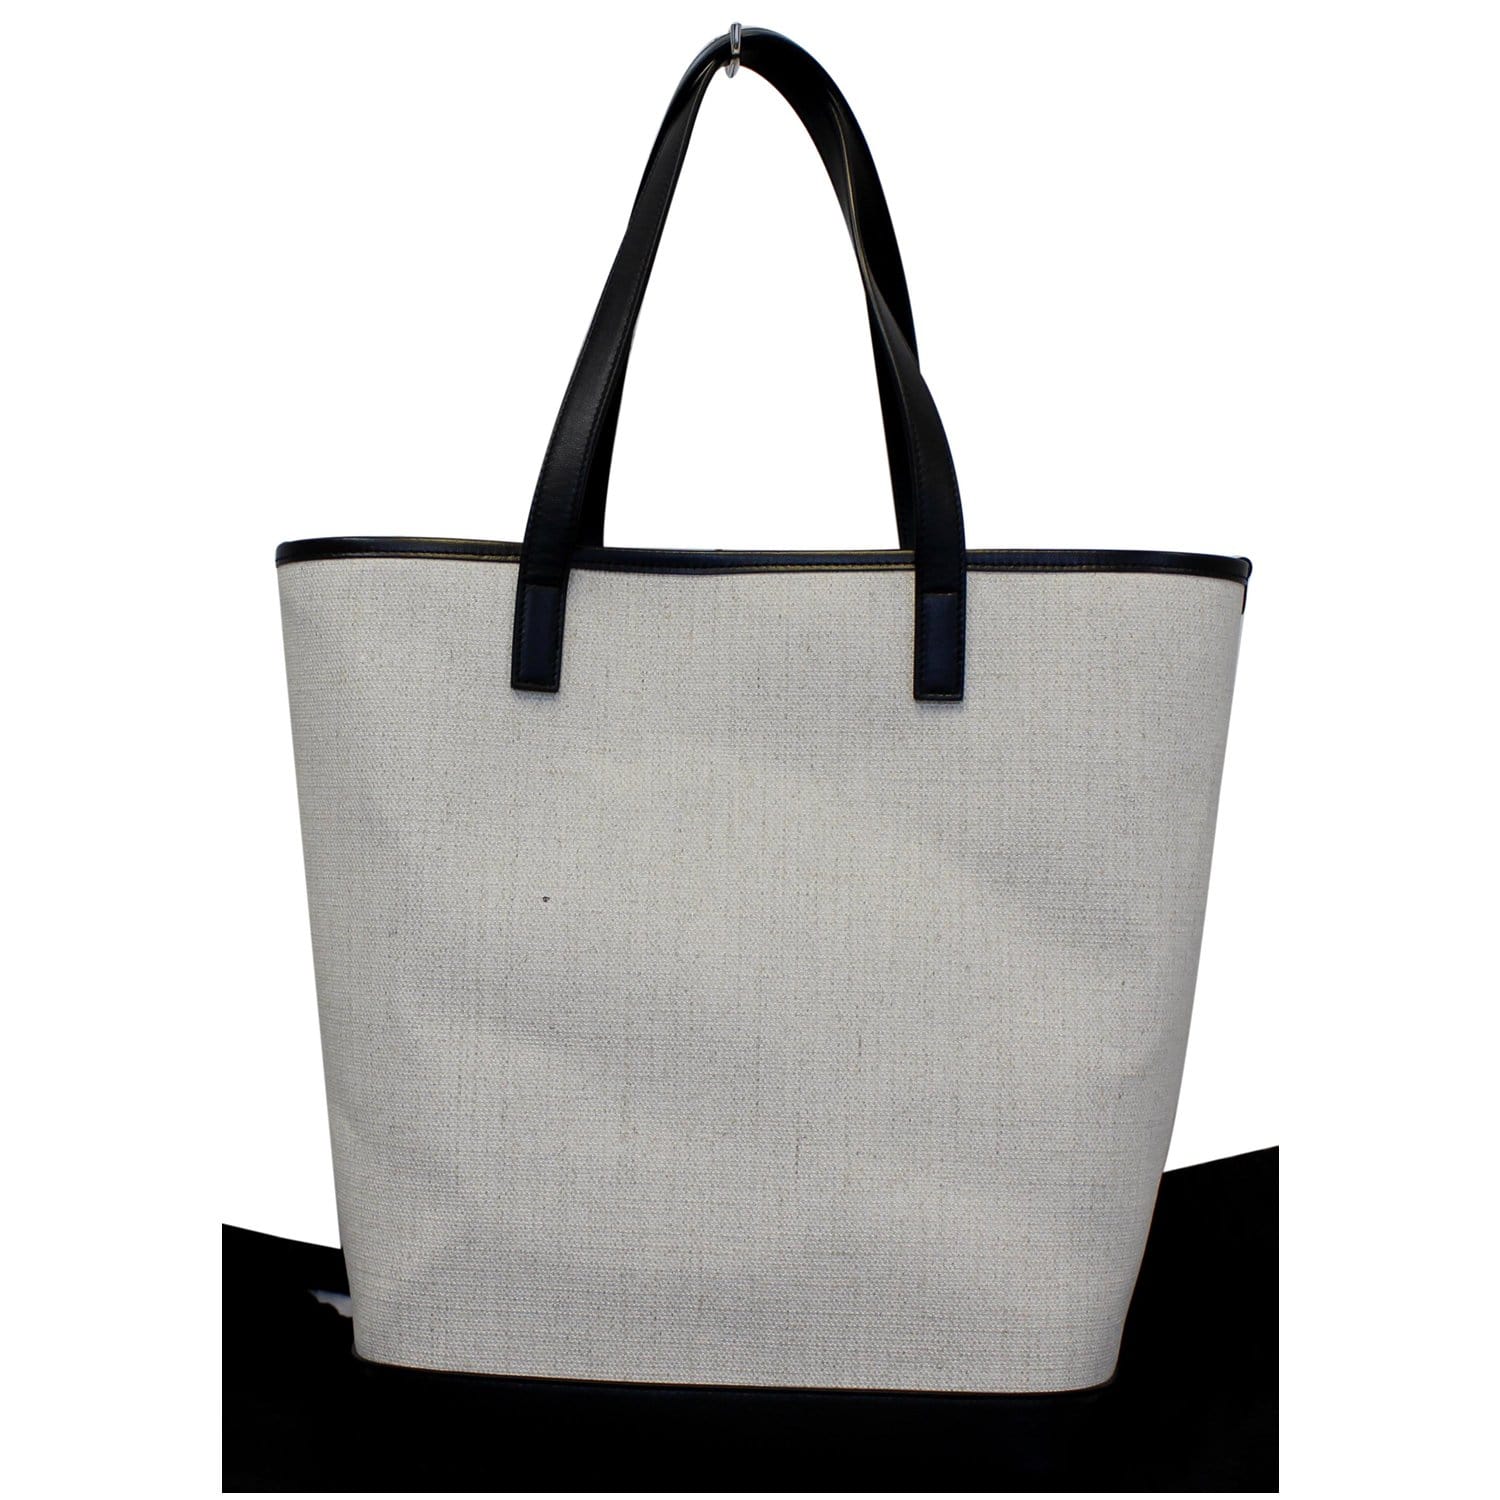 Look for Less: Saint Laurent Linen Logo Tote - The Budget Babe